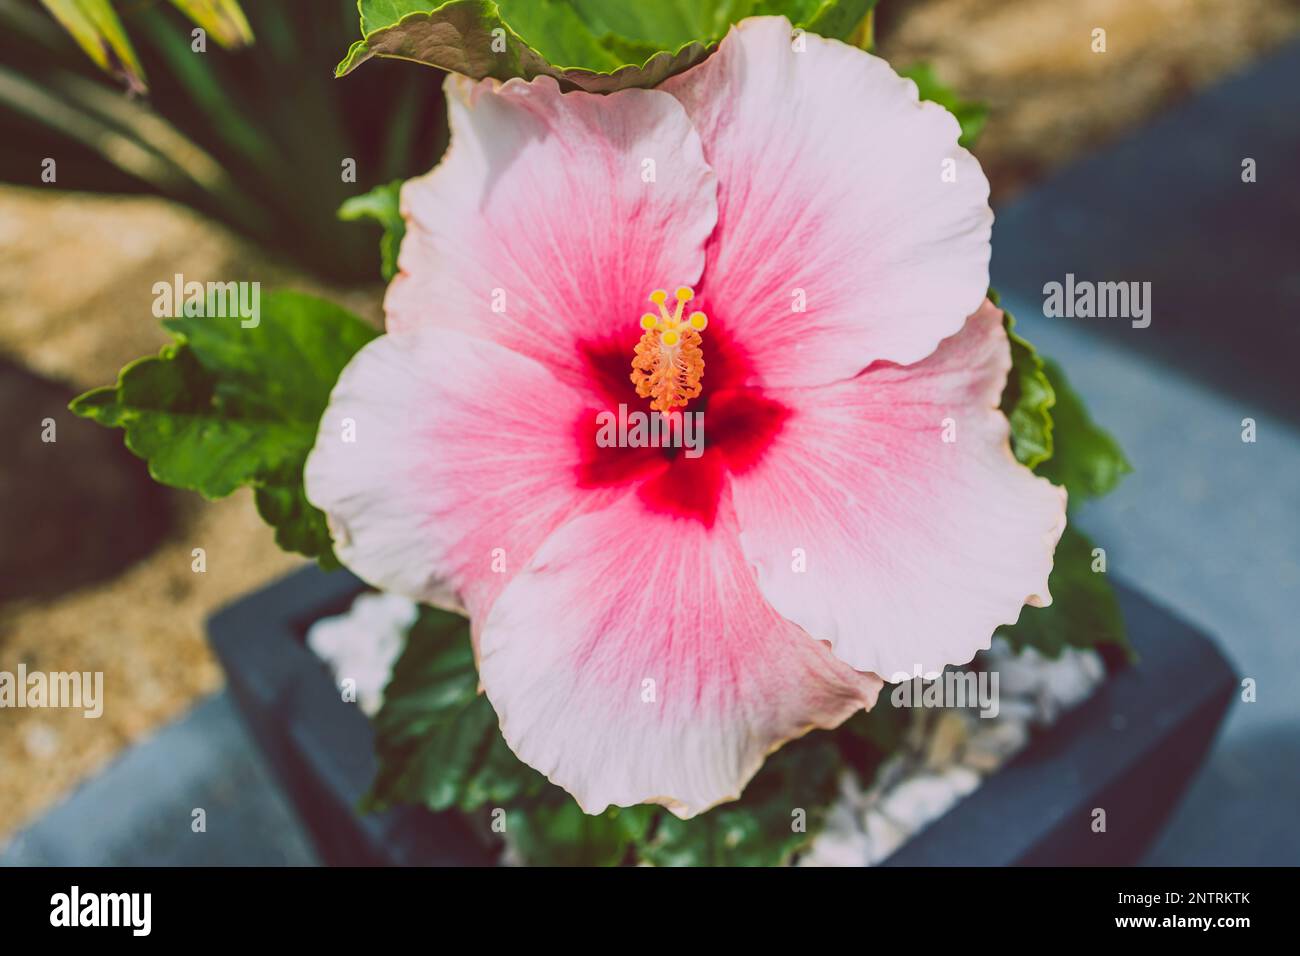 pink hibiscus flower with yellow stigmas and dark centre, close-up shot at shallow depth of field Stock Photo